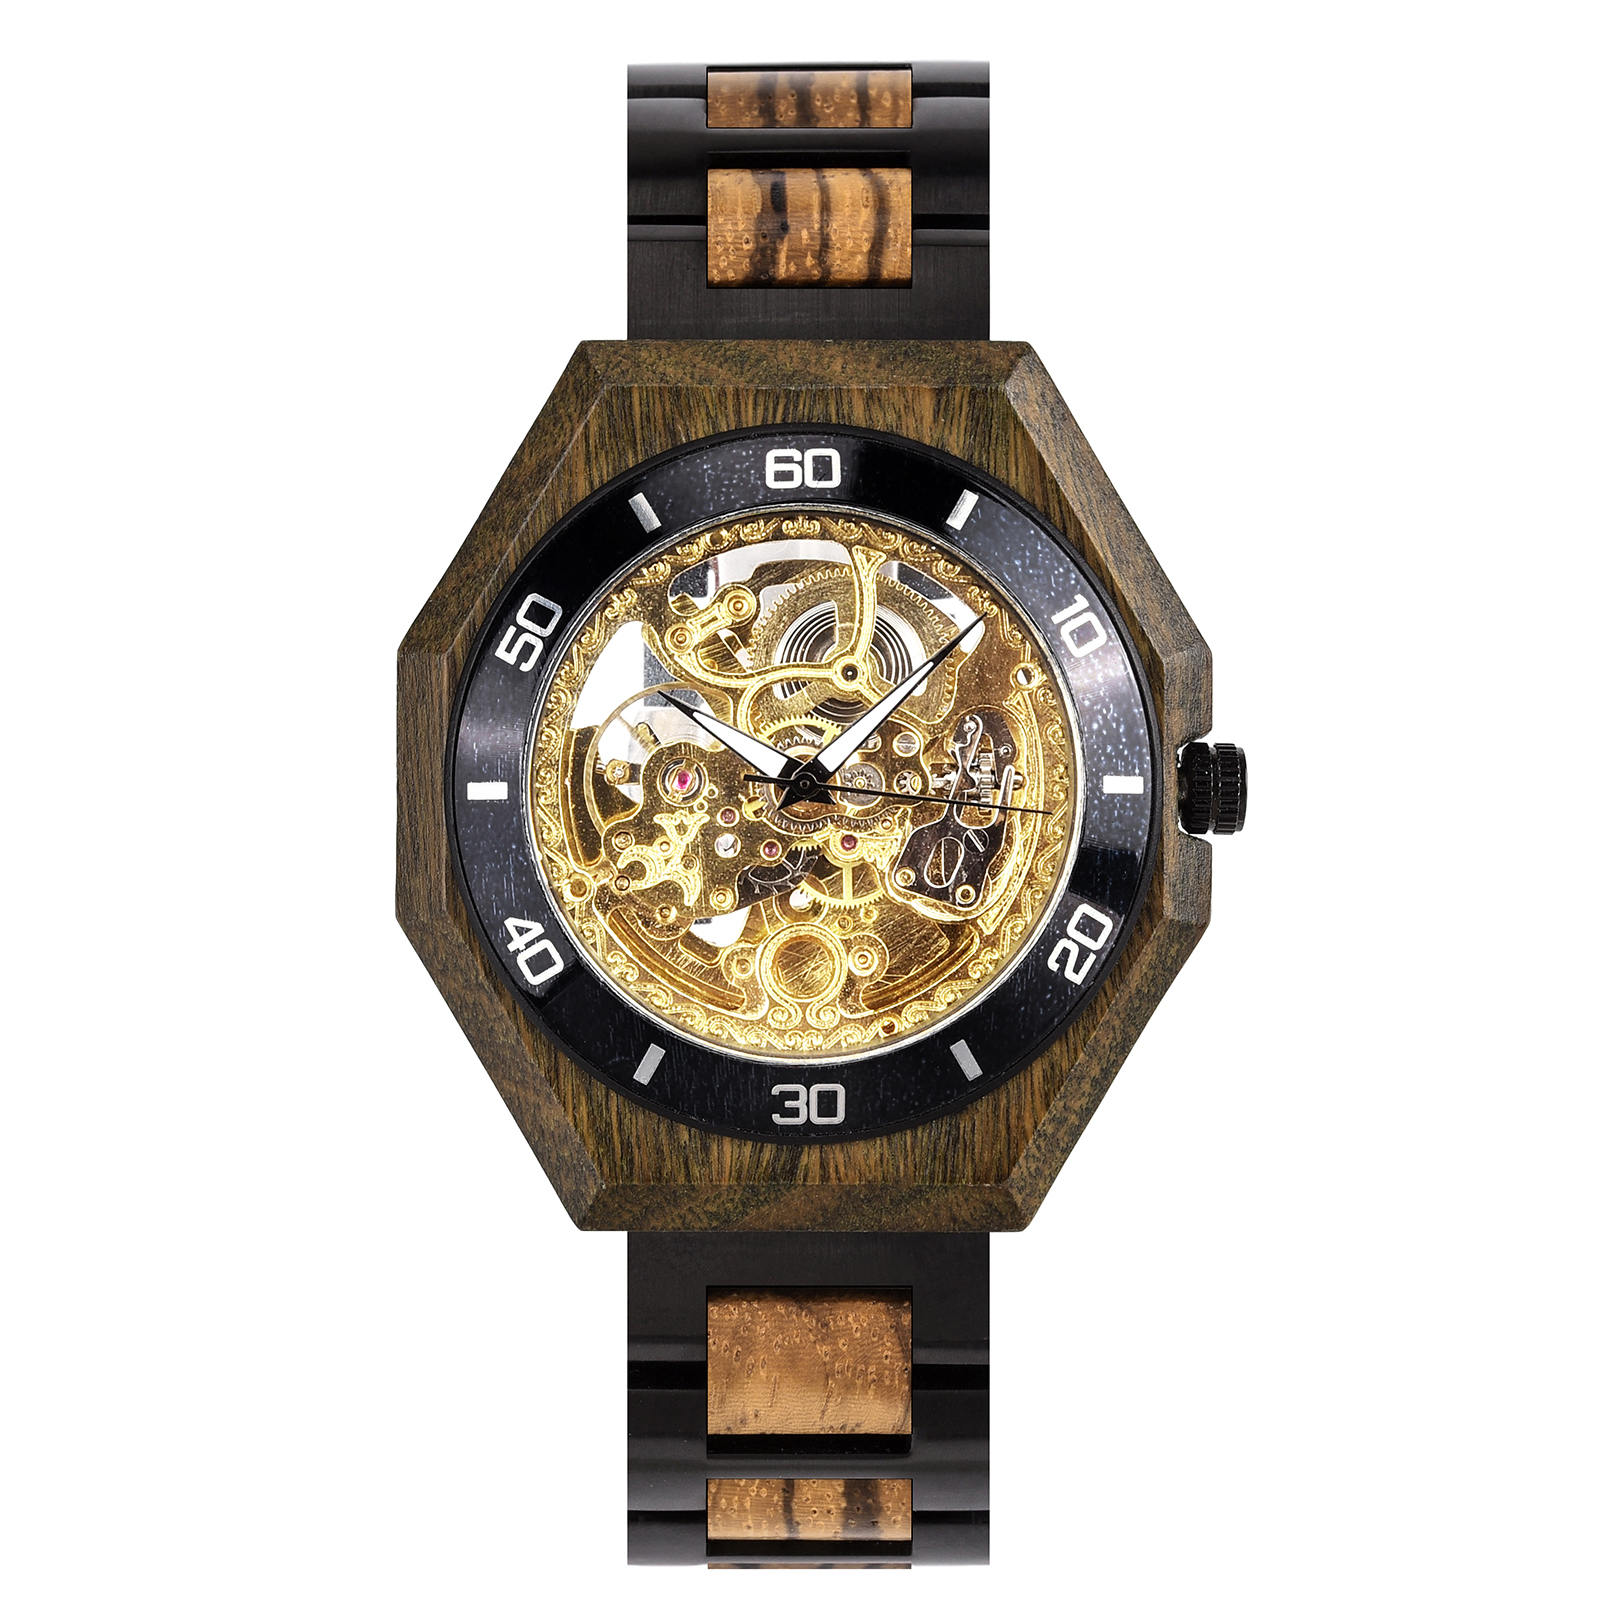 Men's Skeleton Mechanical Wooden Watches Zebrawood Handcrafted